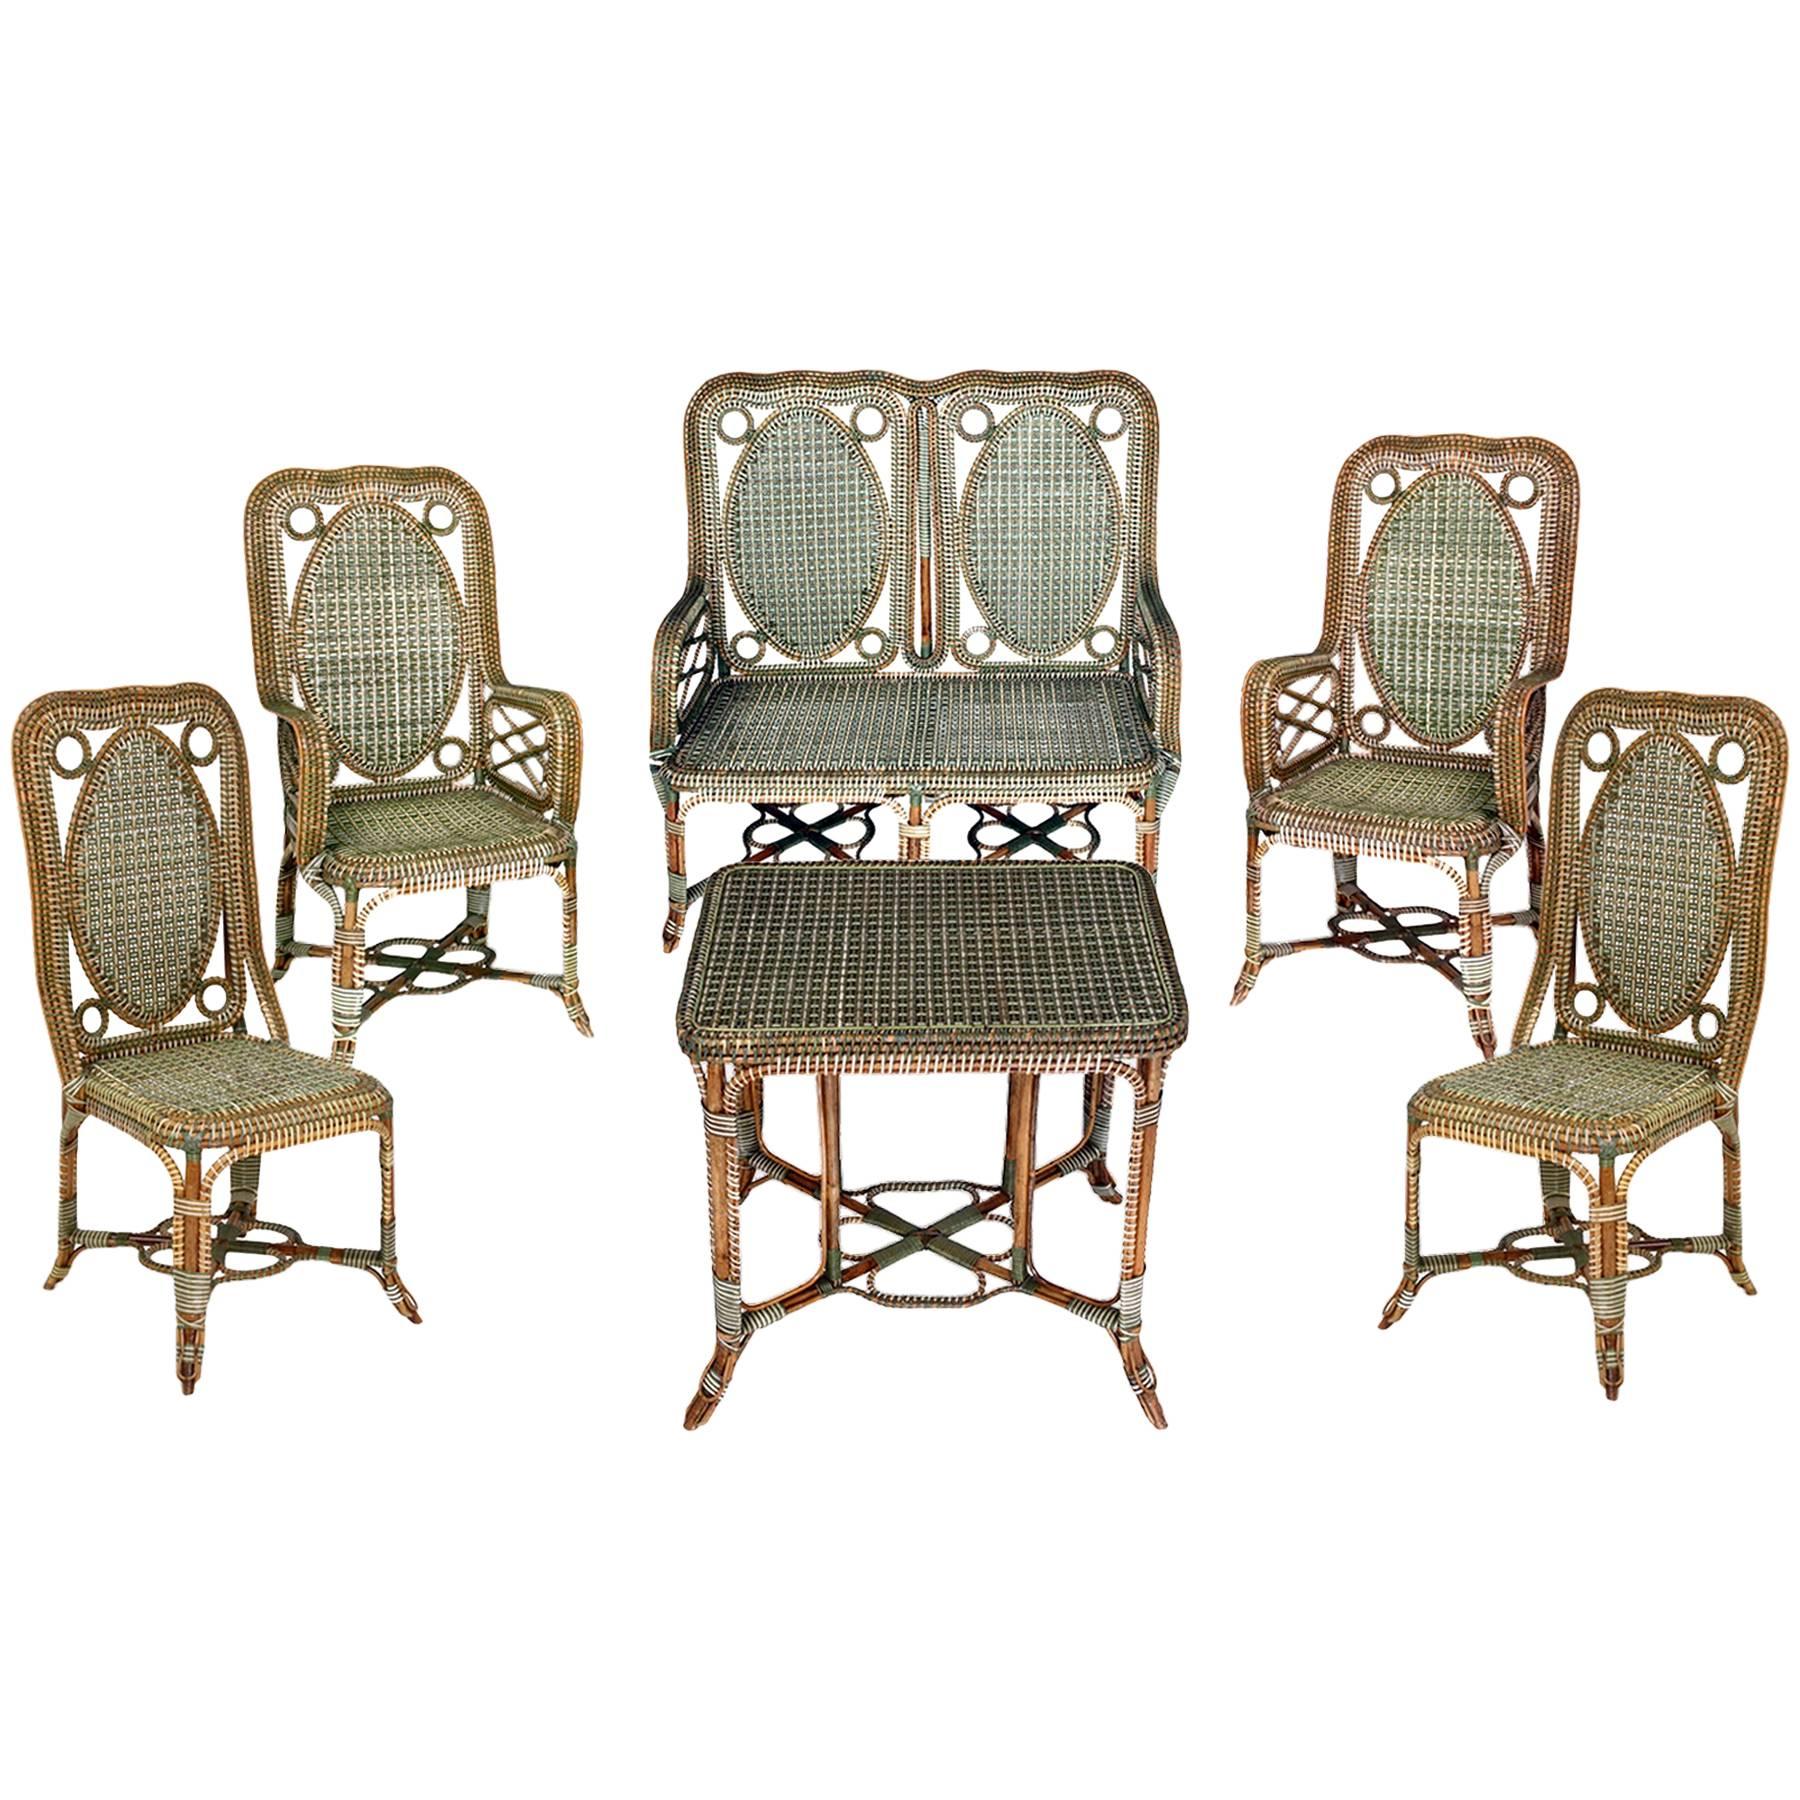 Set of Winter Garden Furniture by Perret et Vibert, France, End of 19th Century